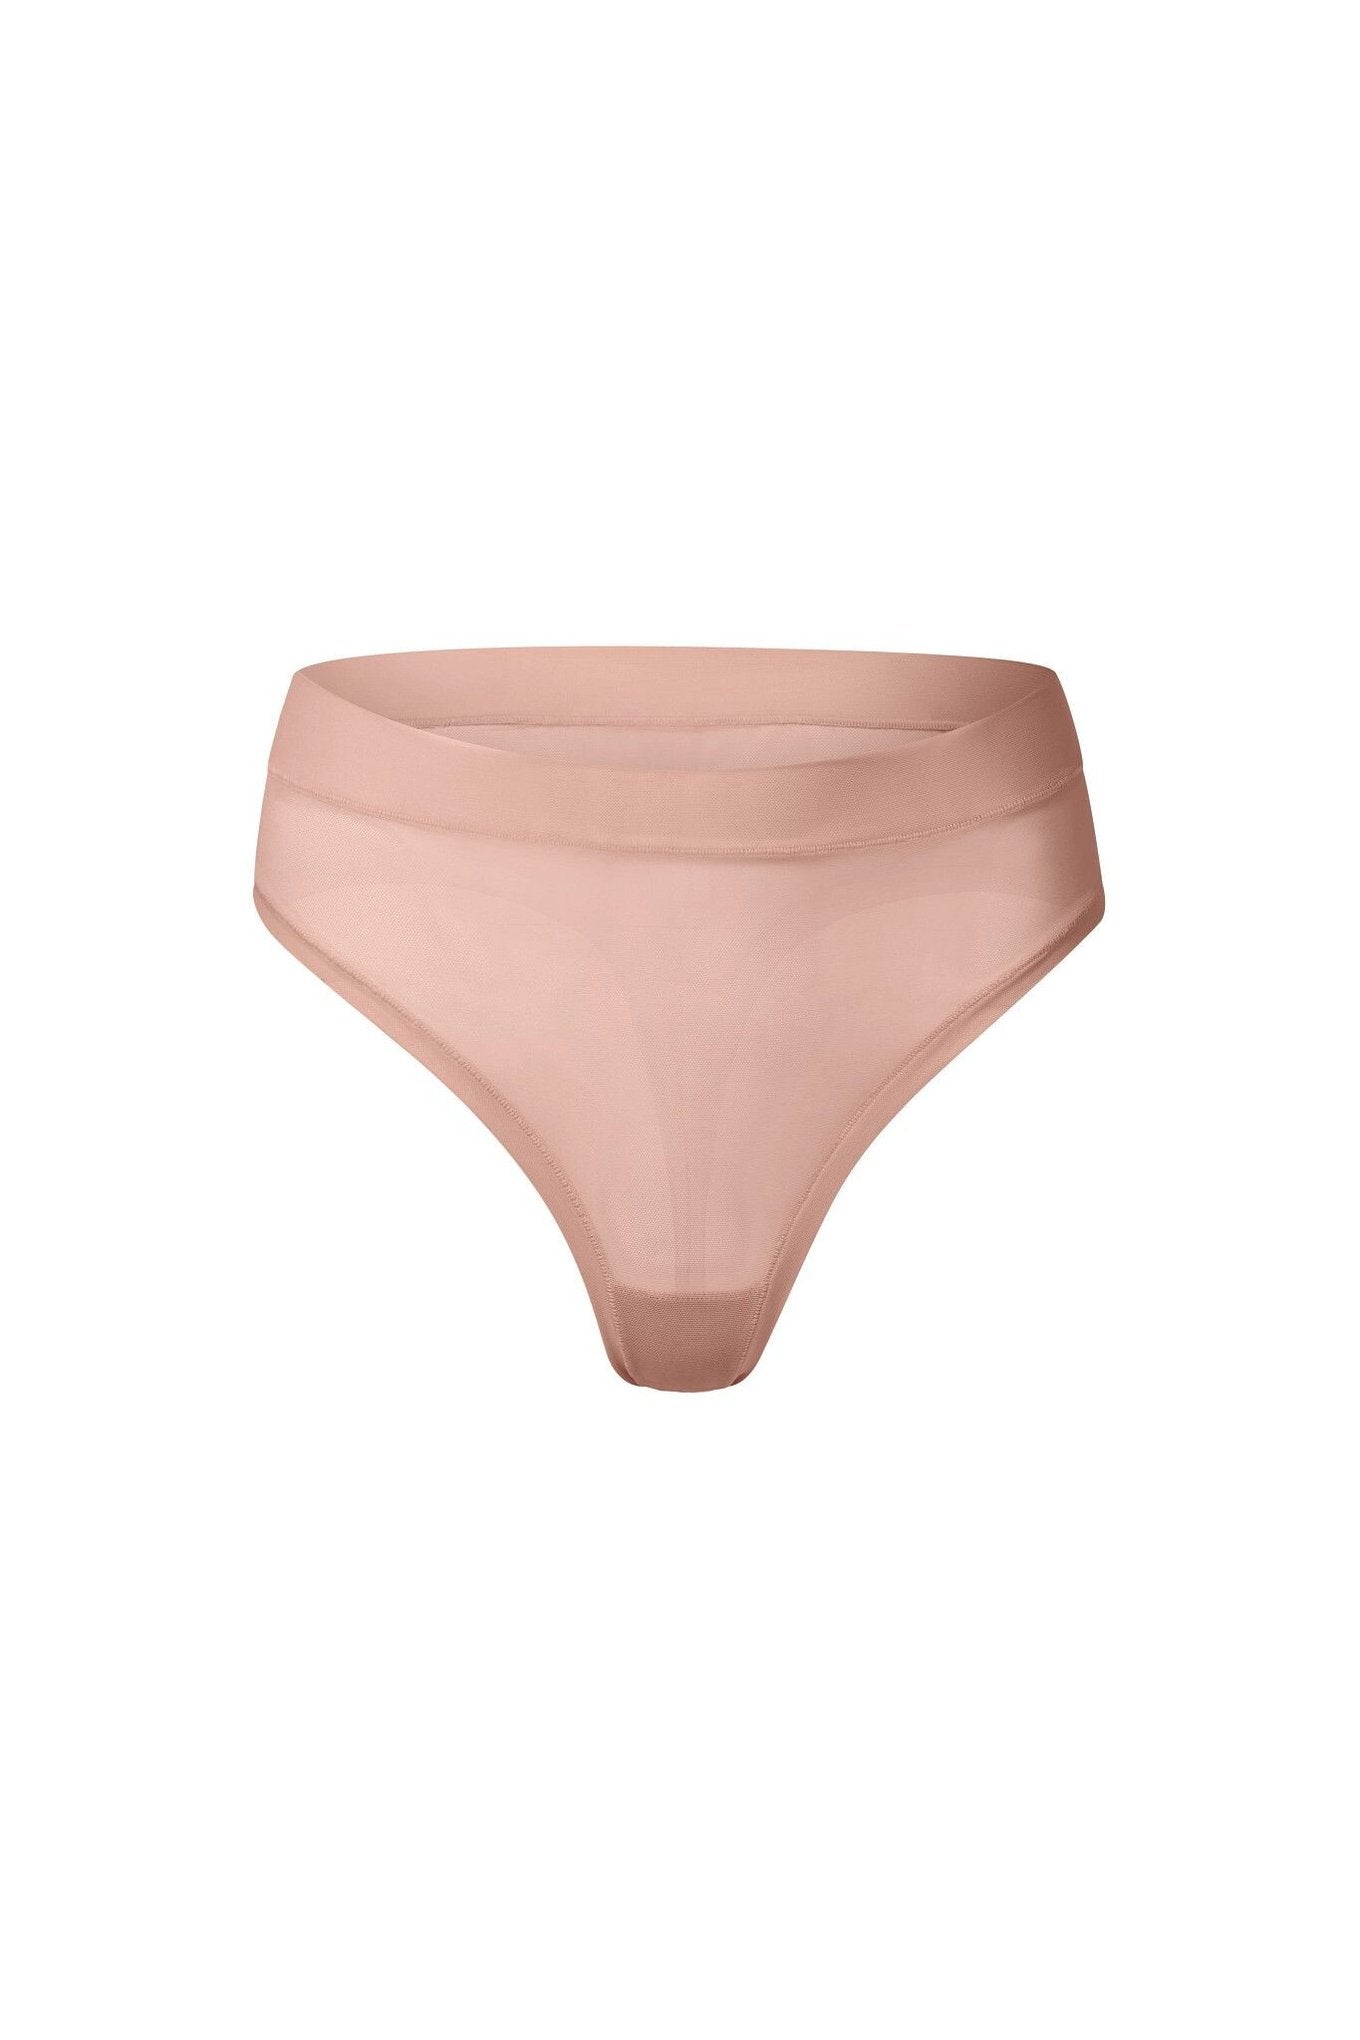 nueskin Carey Mesh Mid-Rise Thong in color Rose Cloud and shape thong